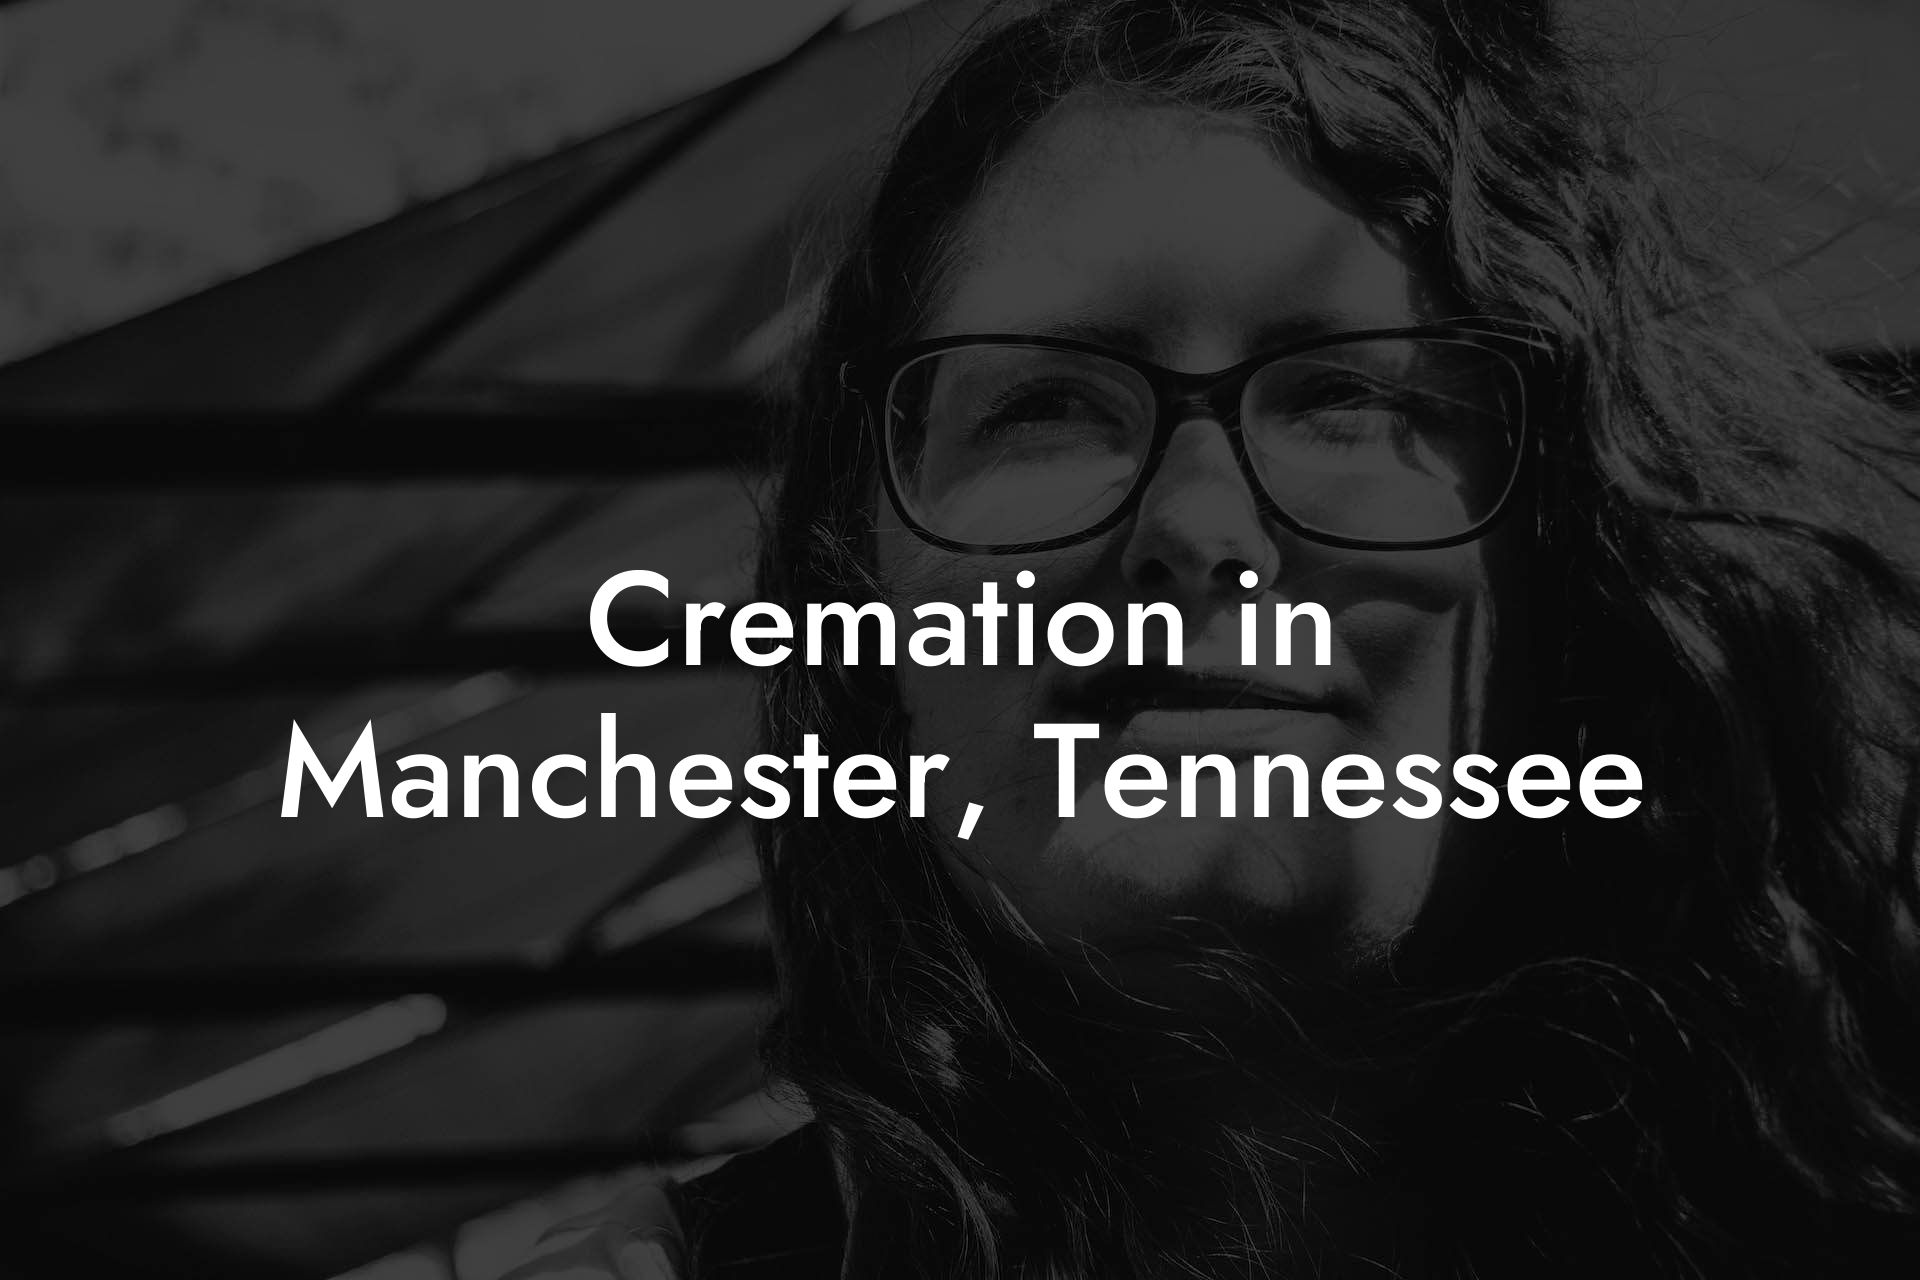 Cremation in Manchester, Tennessee